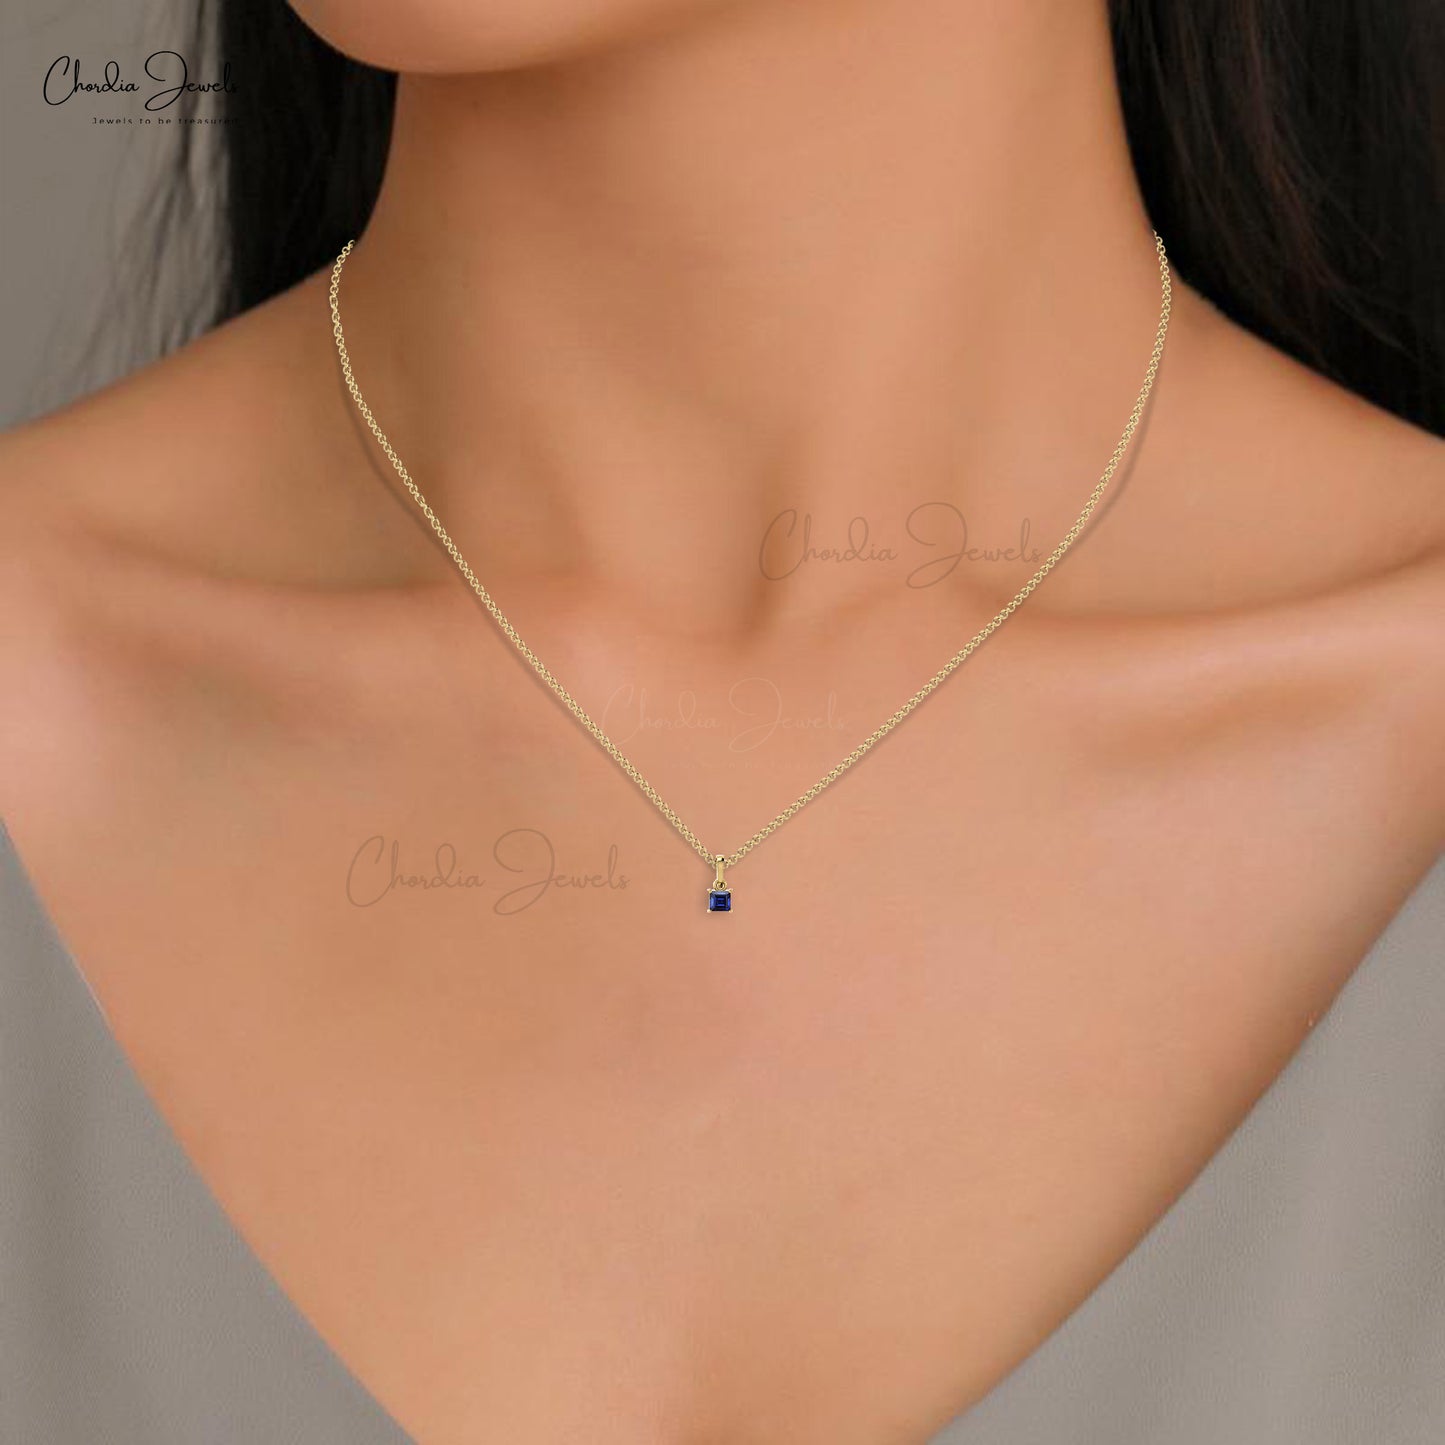 High Quality Natural Gemstone Pendant Necklace 4mm Square Shape Blue Sapphire Pendant in 14k Solid Gold Anniversary Gift For Wife